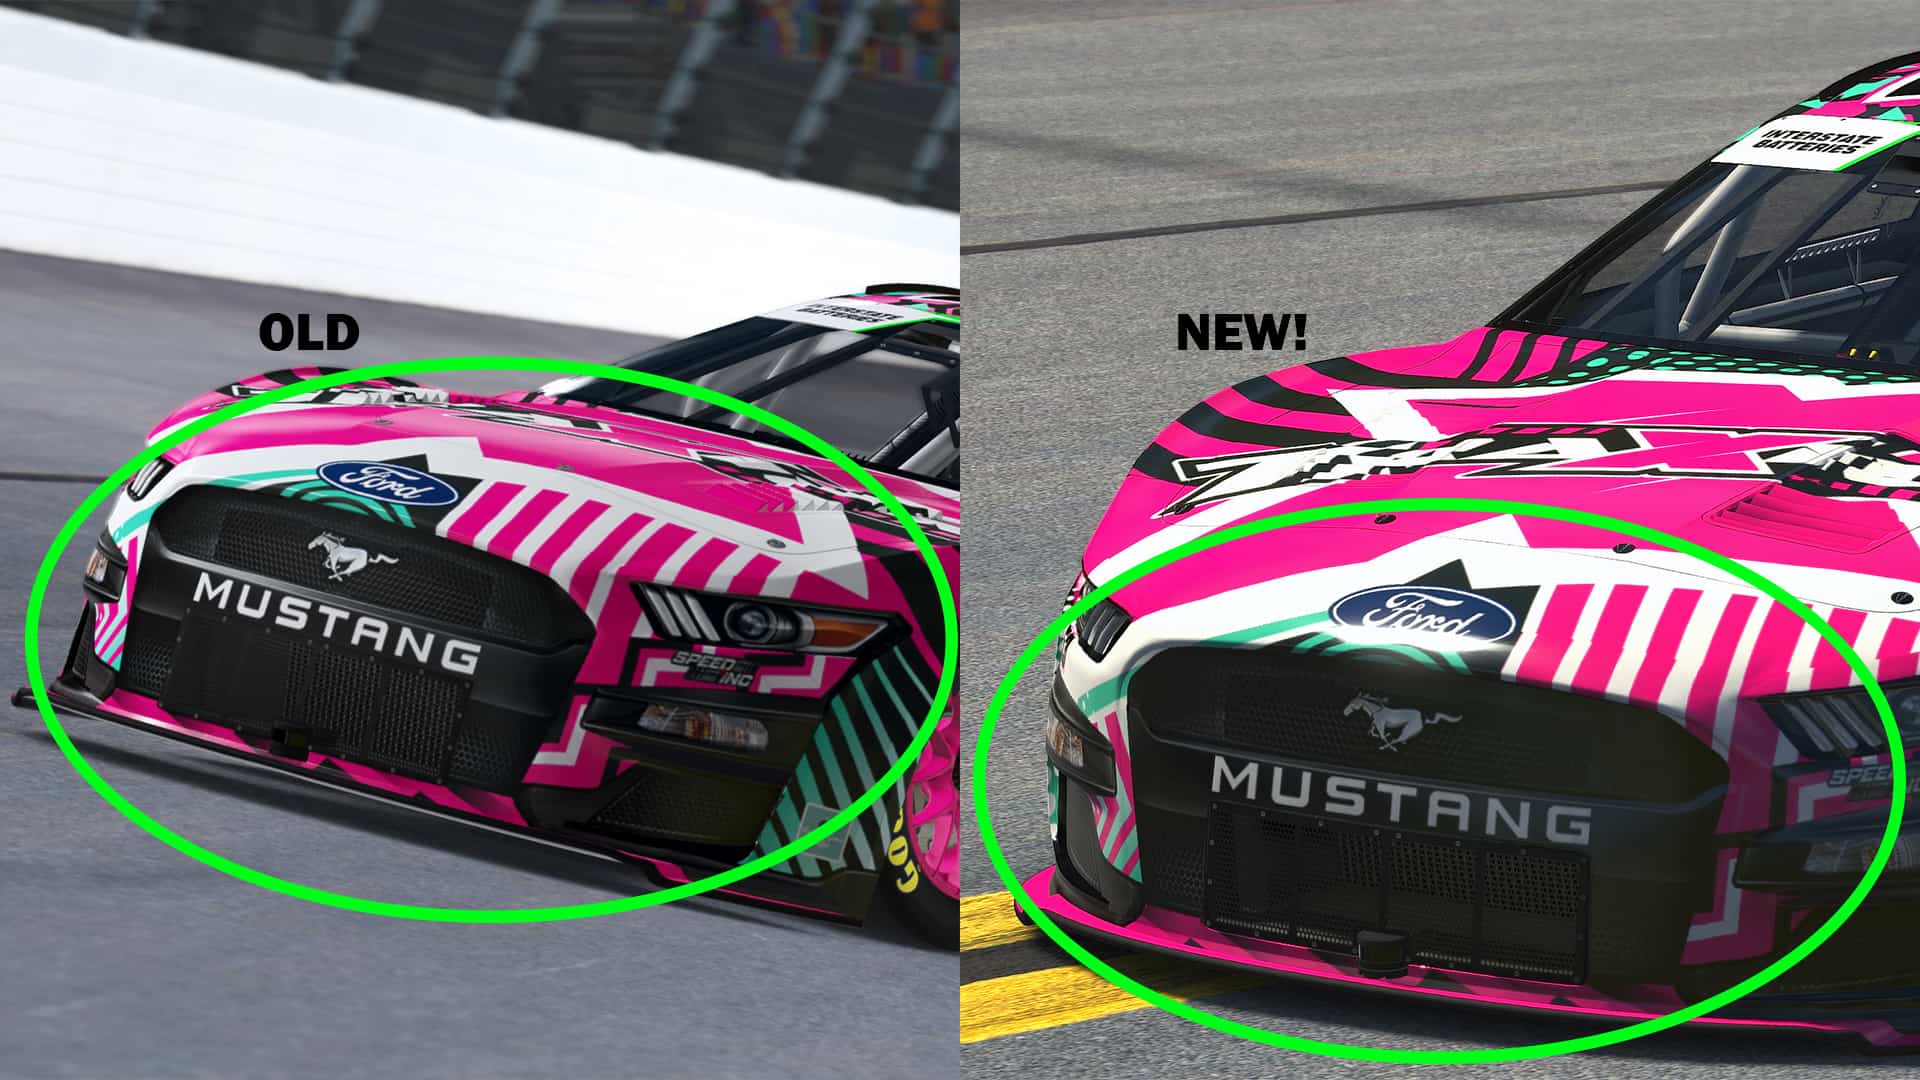 2023 iRacing Season 1 Patch 3 brings NASCAR NEXT Gen template changes